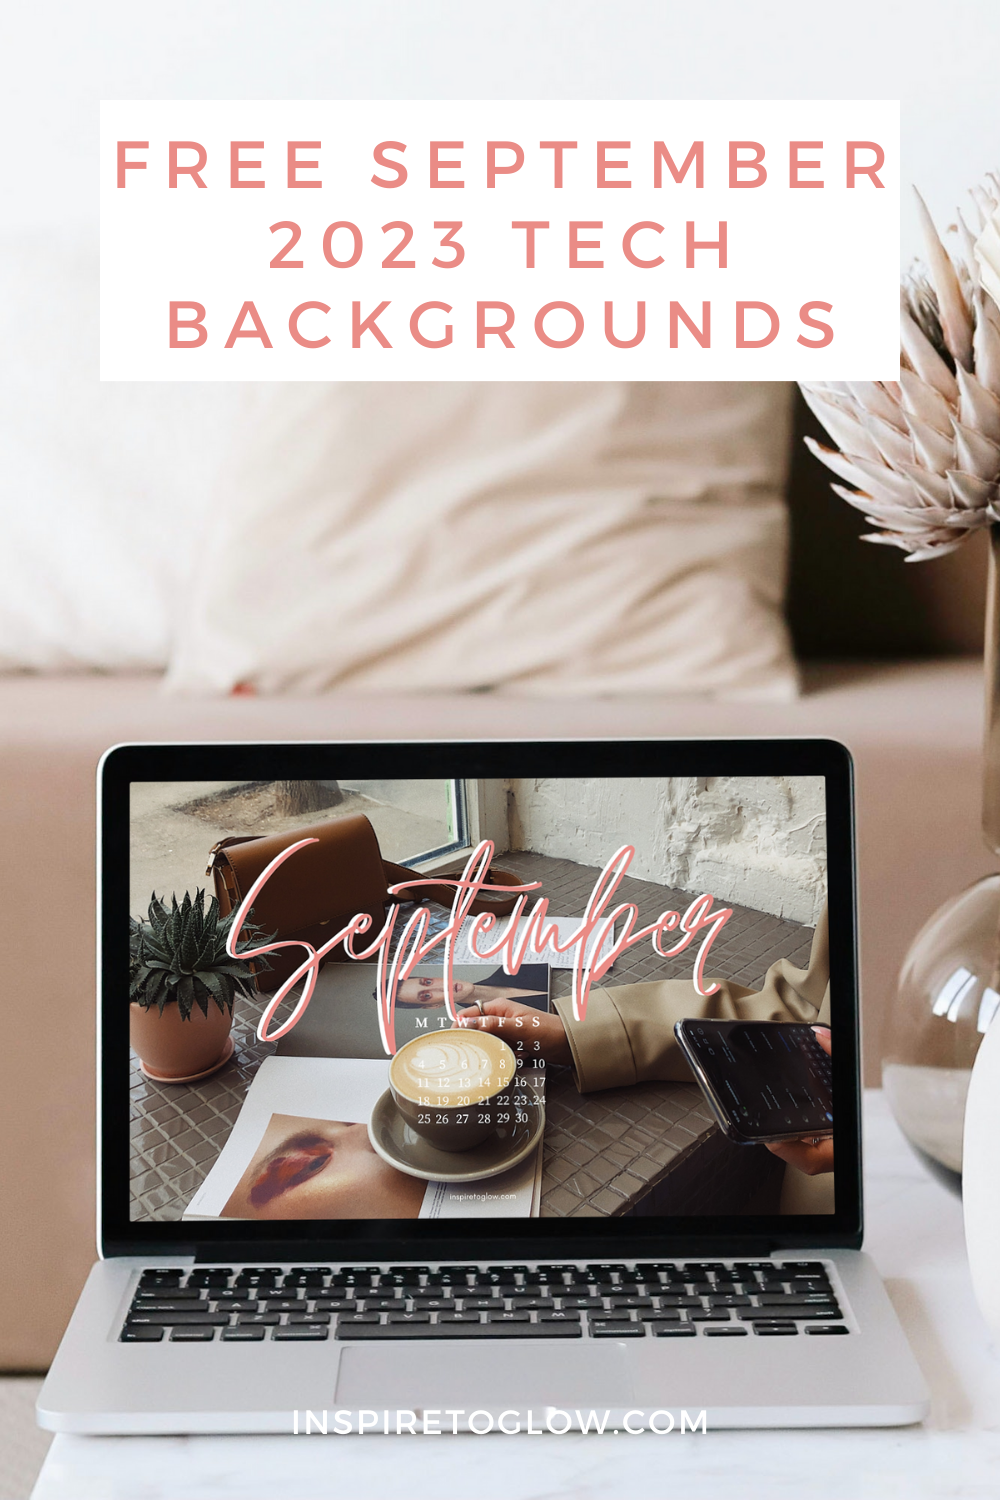 Free, downloadable September 2023 Tech Backgrounds - Inspire to Glow